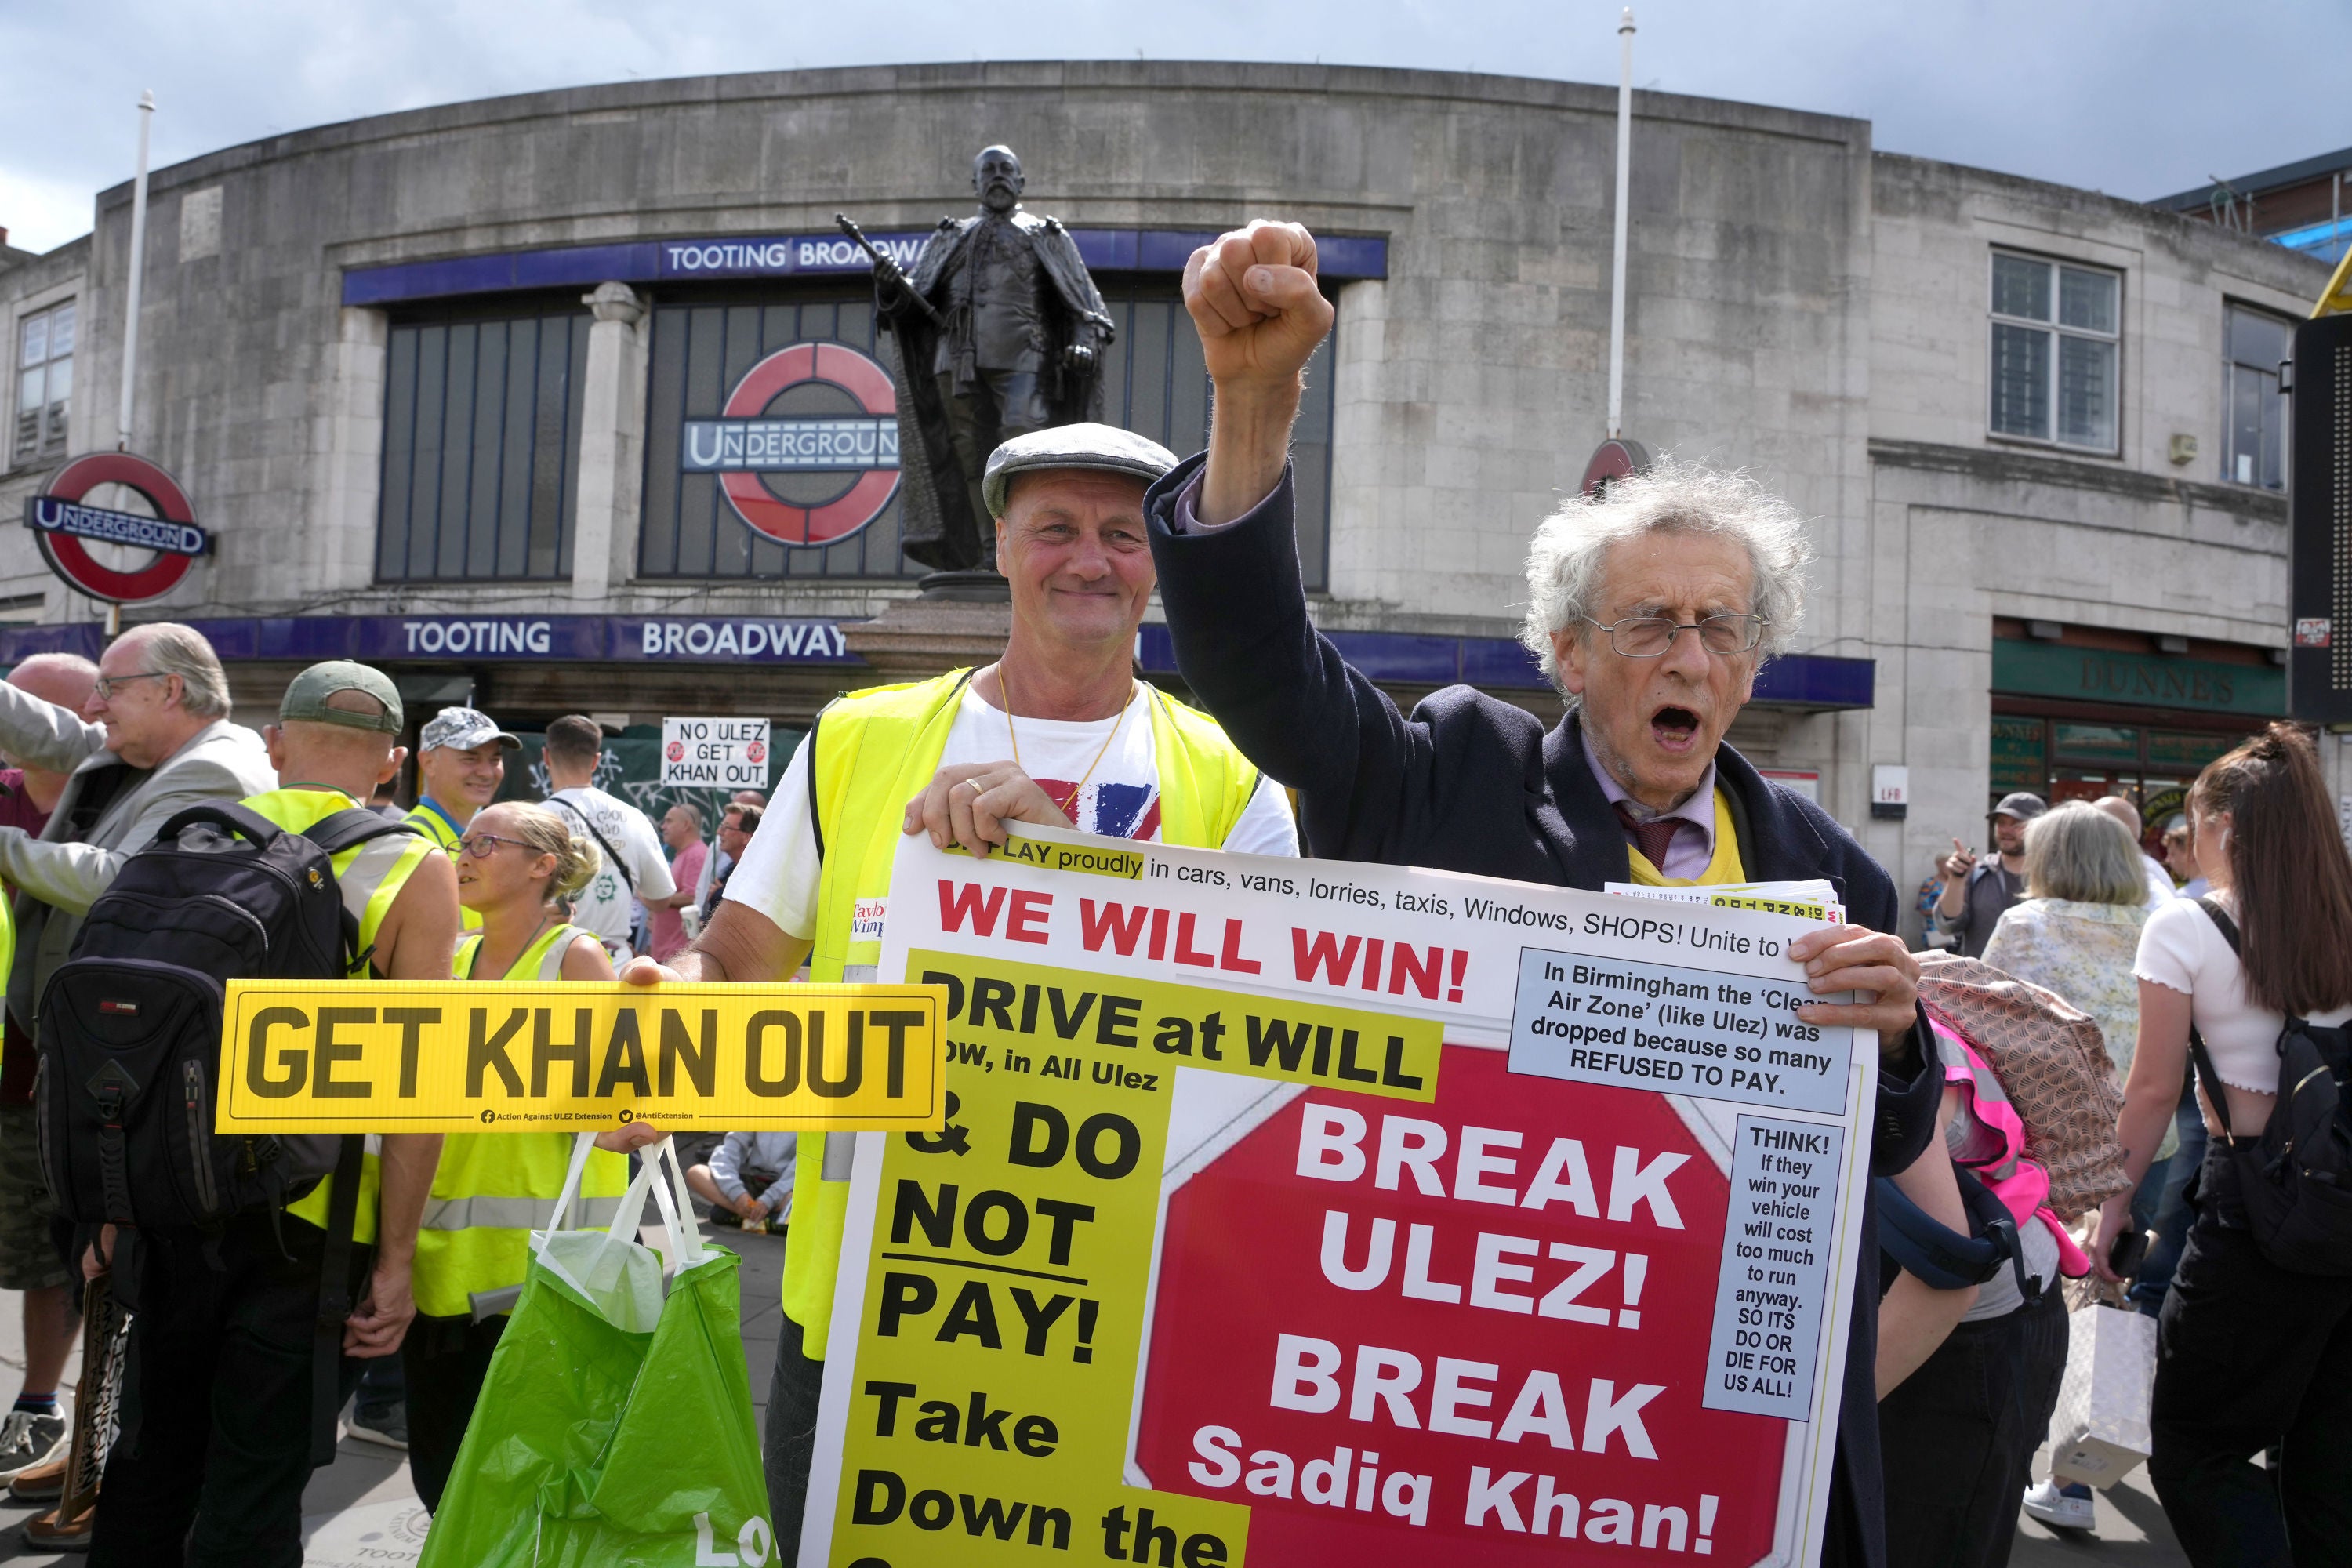 Piers Corbyn (right) joins a protest against the scheme in Tooting on Saturday